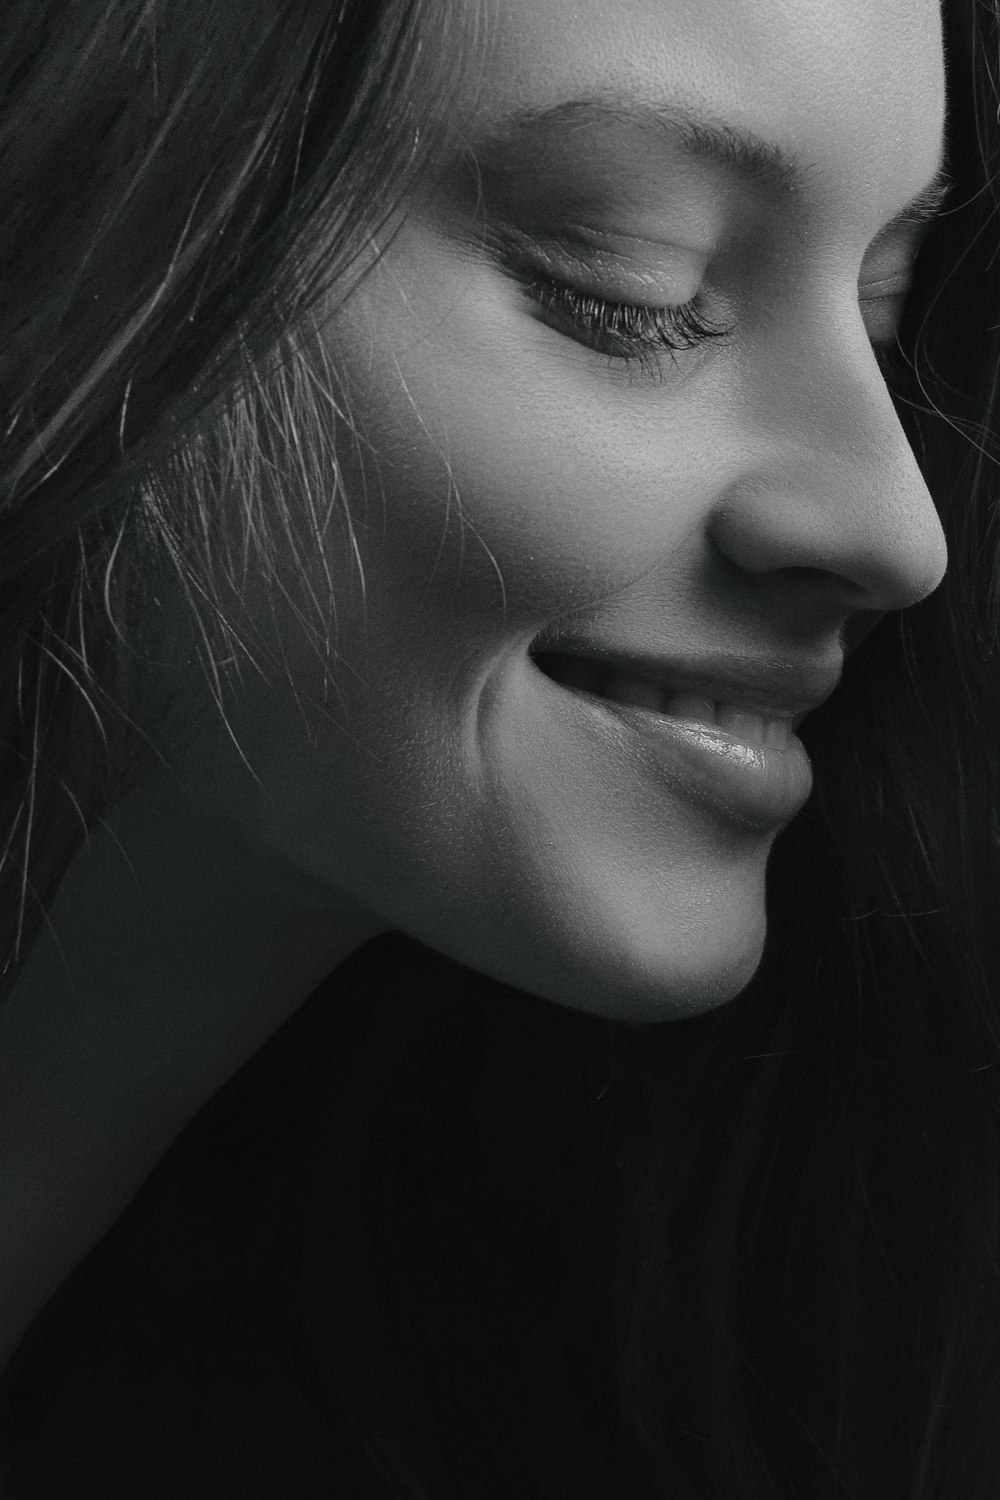 grayscale photo of smiling woman